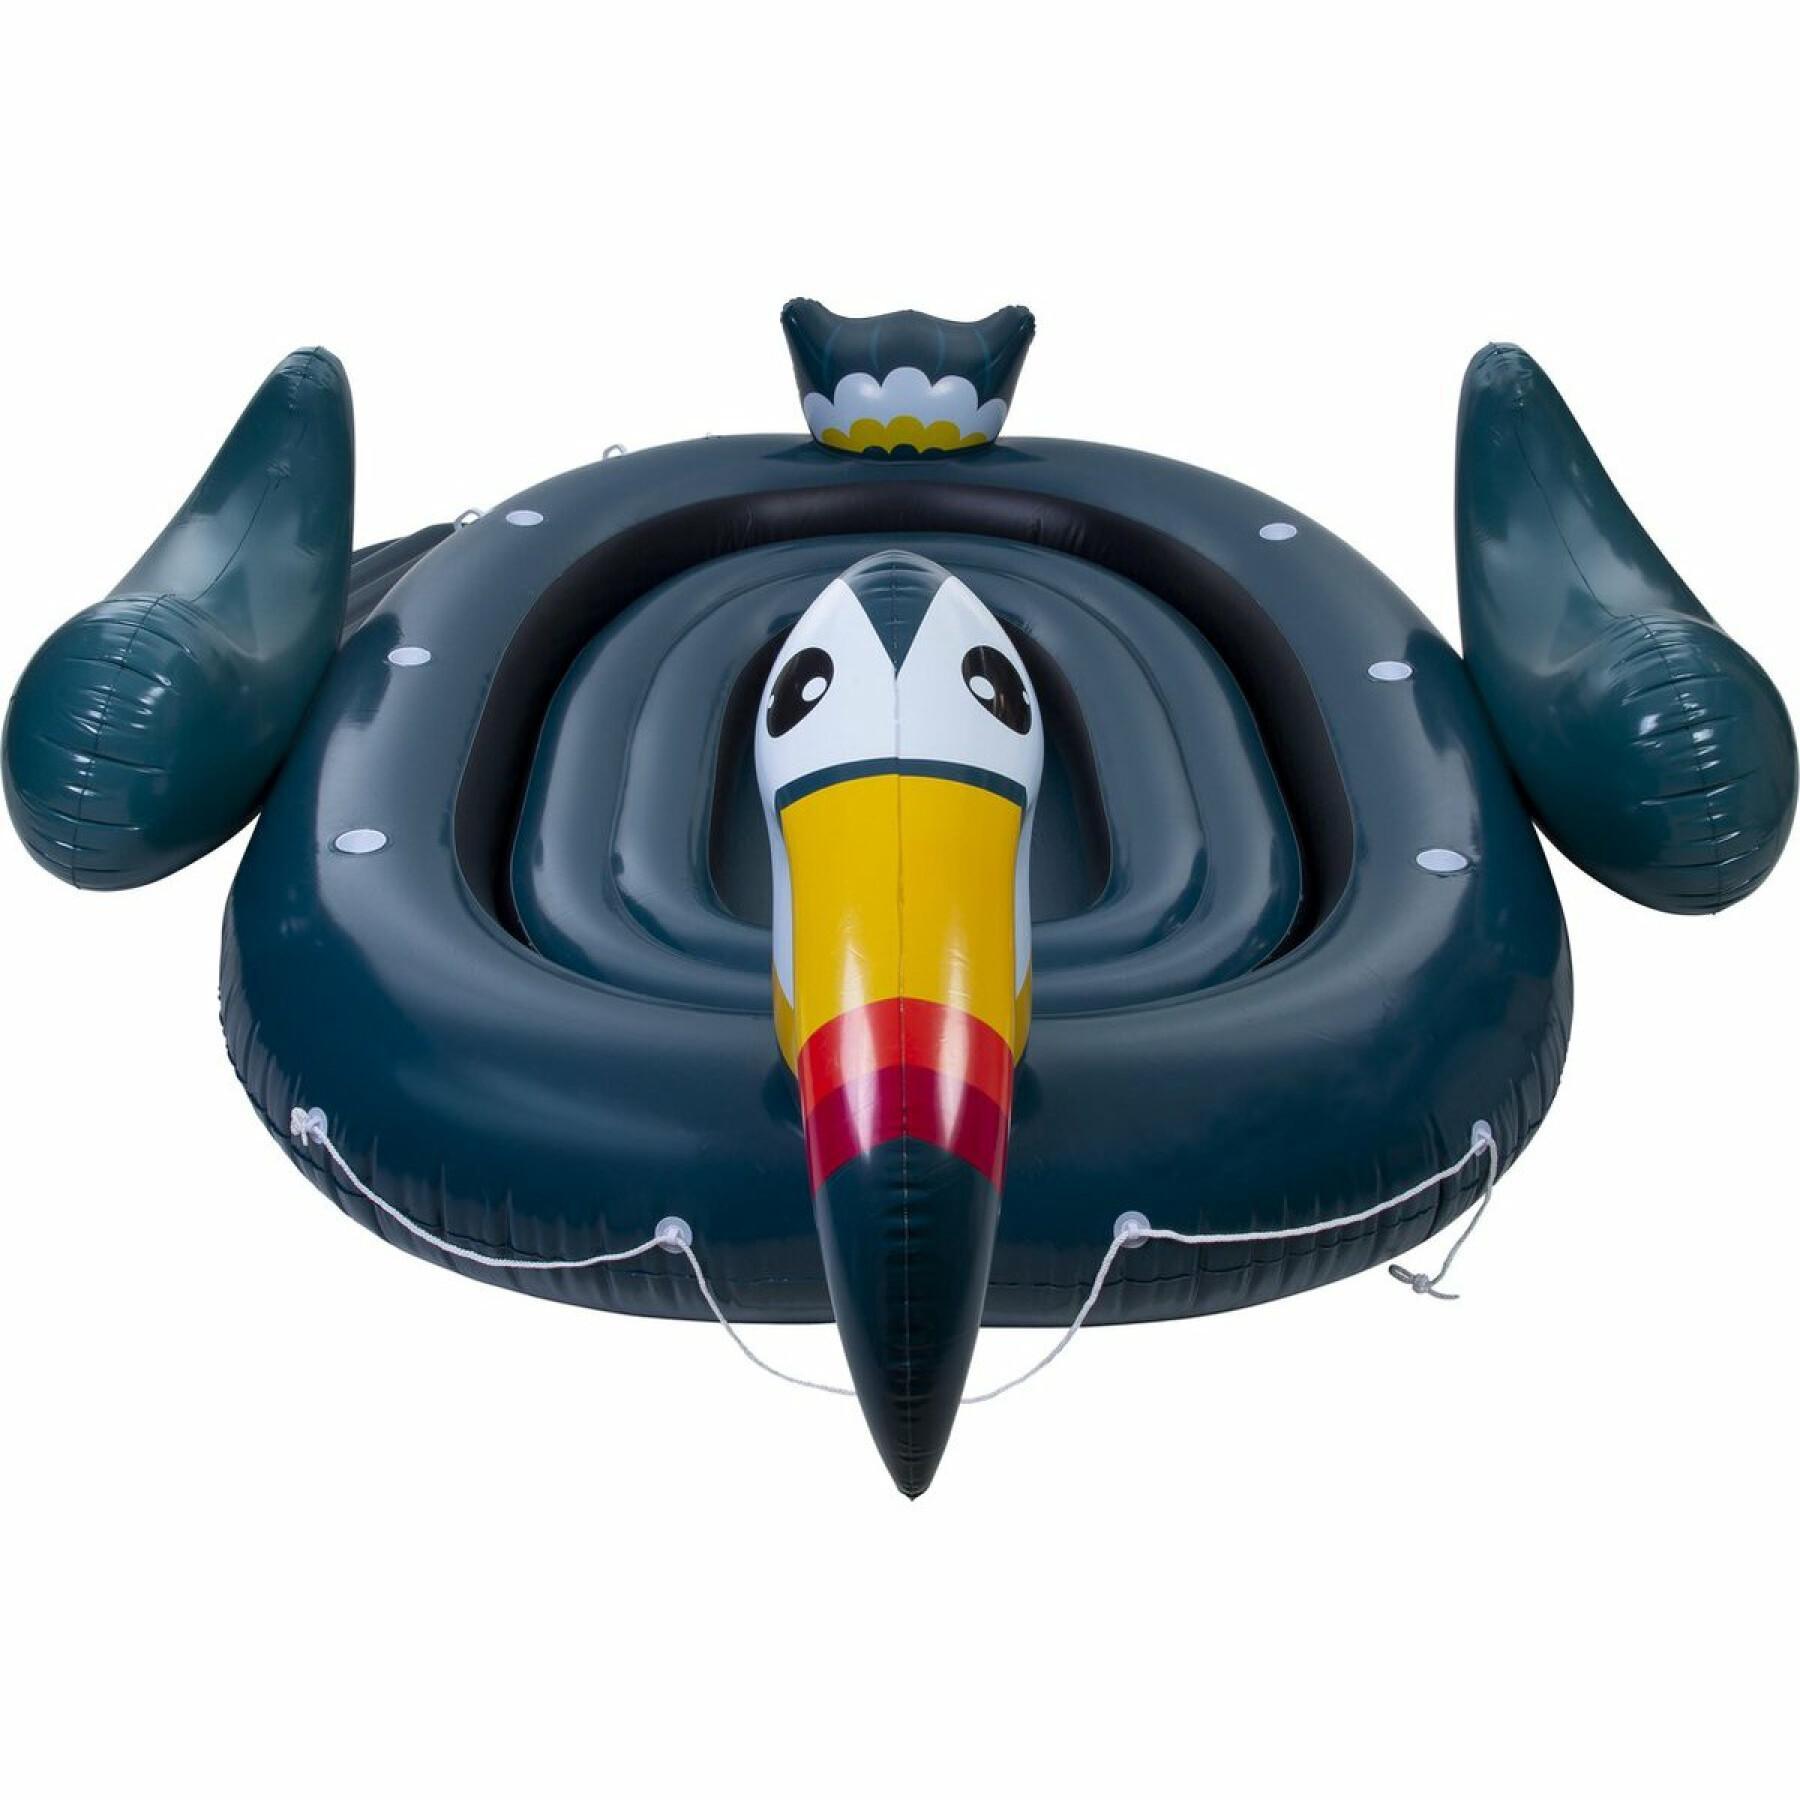 Bateau gonflable The Pure4Fun Toucan